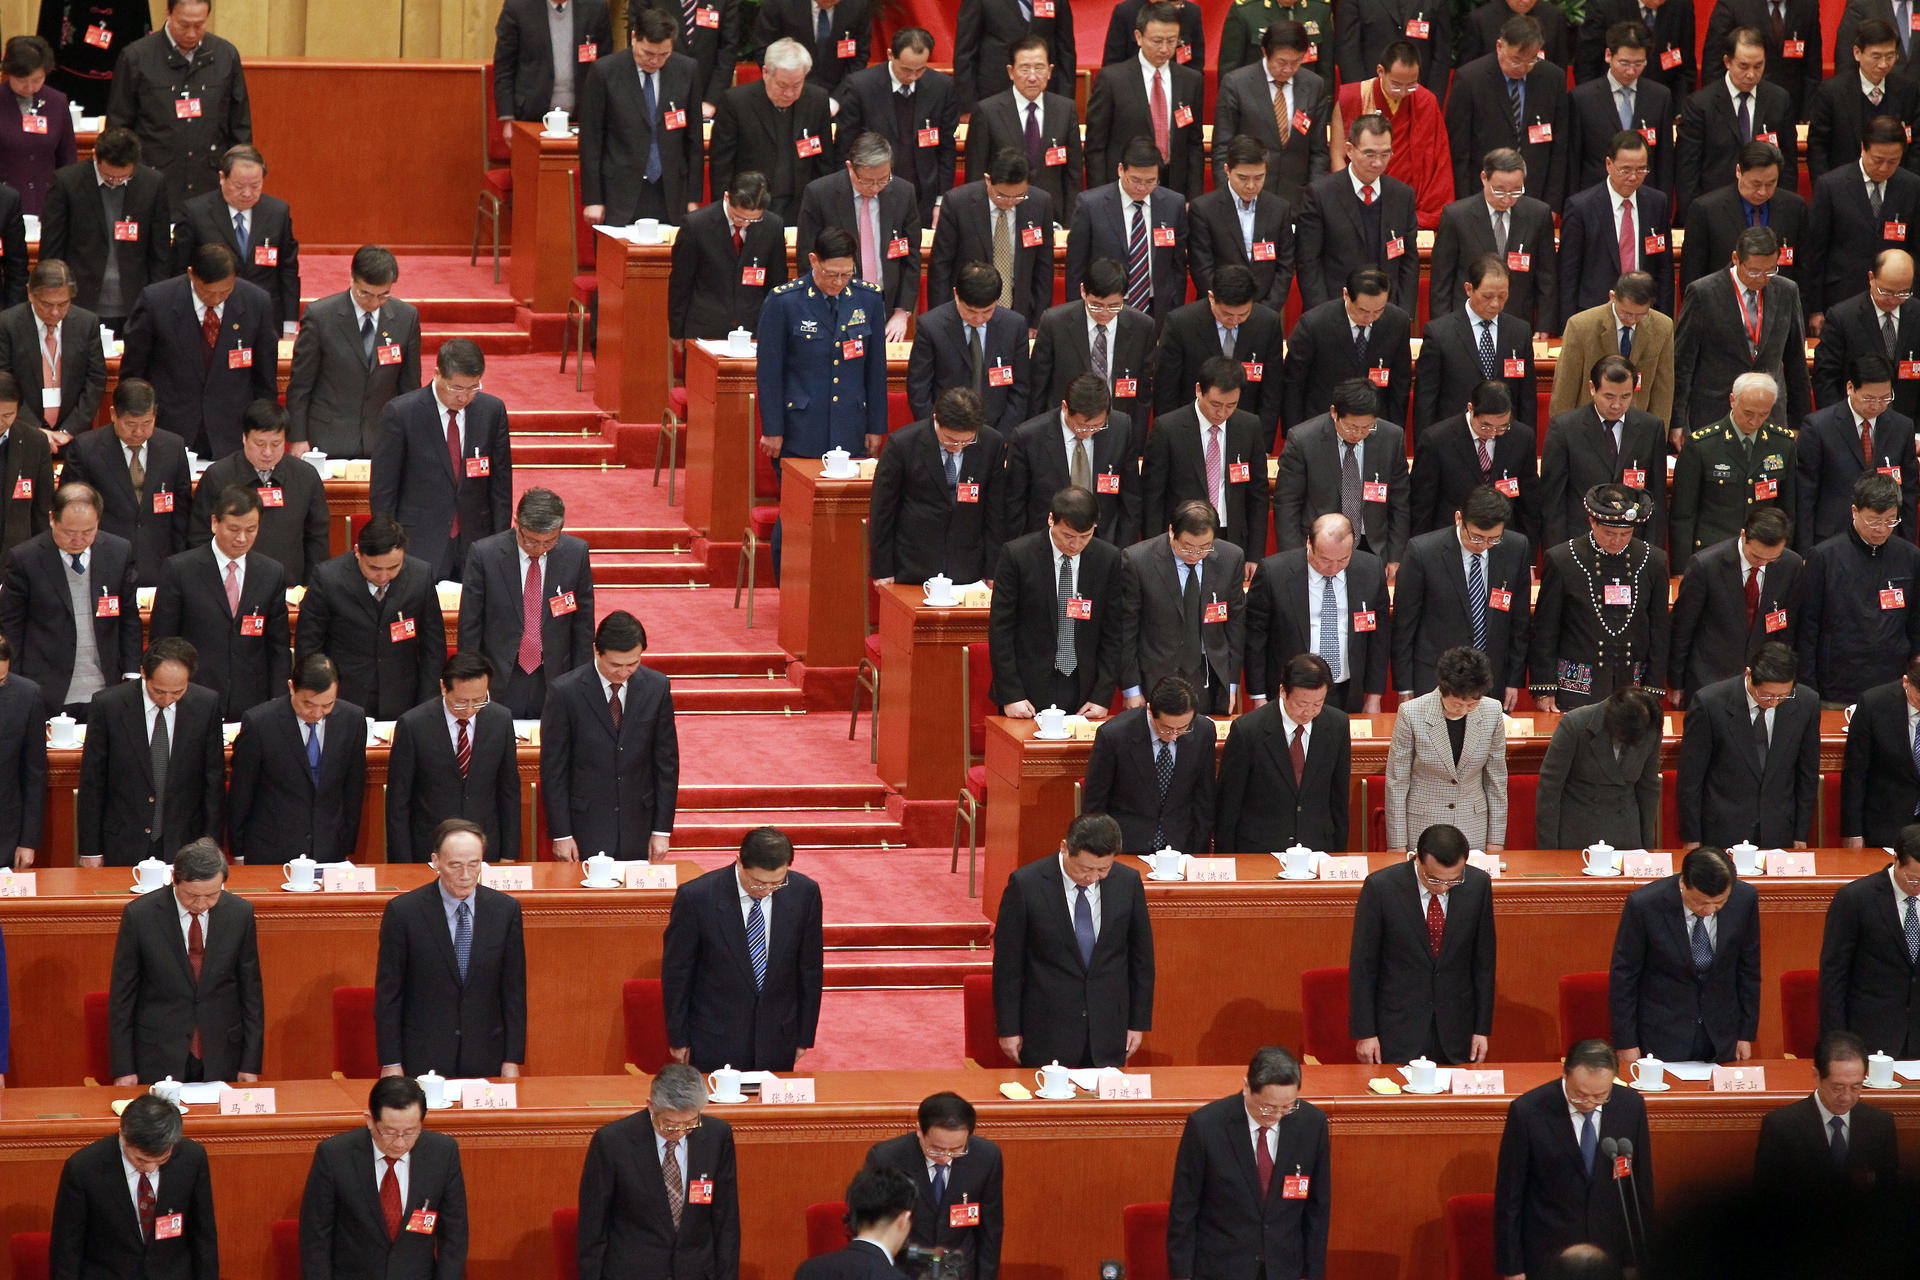 A moment's silence for the victims at the Chinese People's Political Consultative Conference in Beijing. Photo: Simon Song